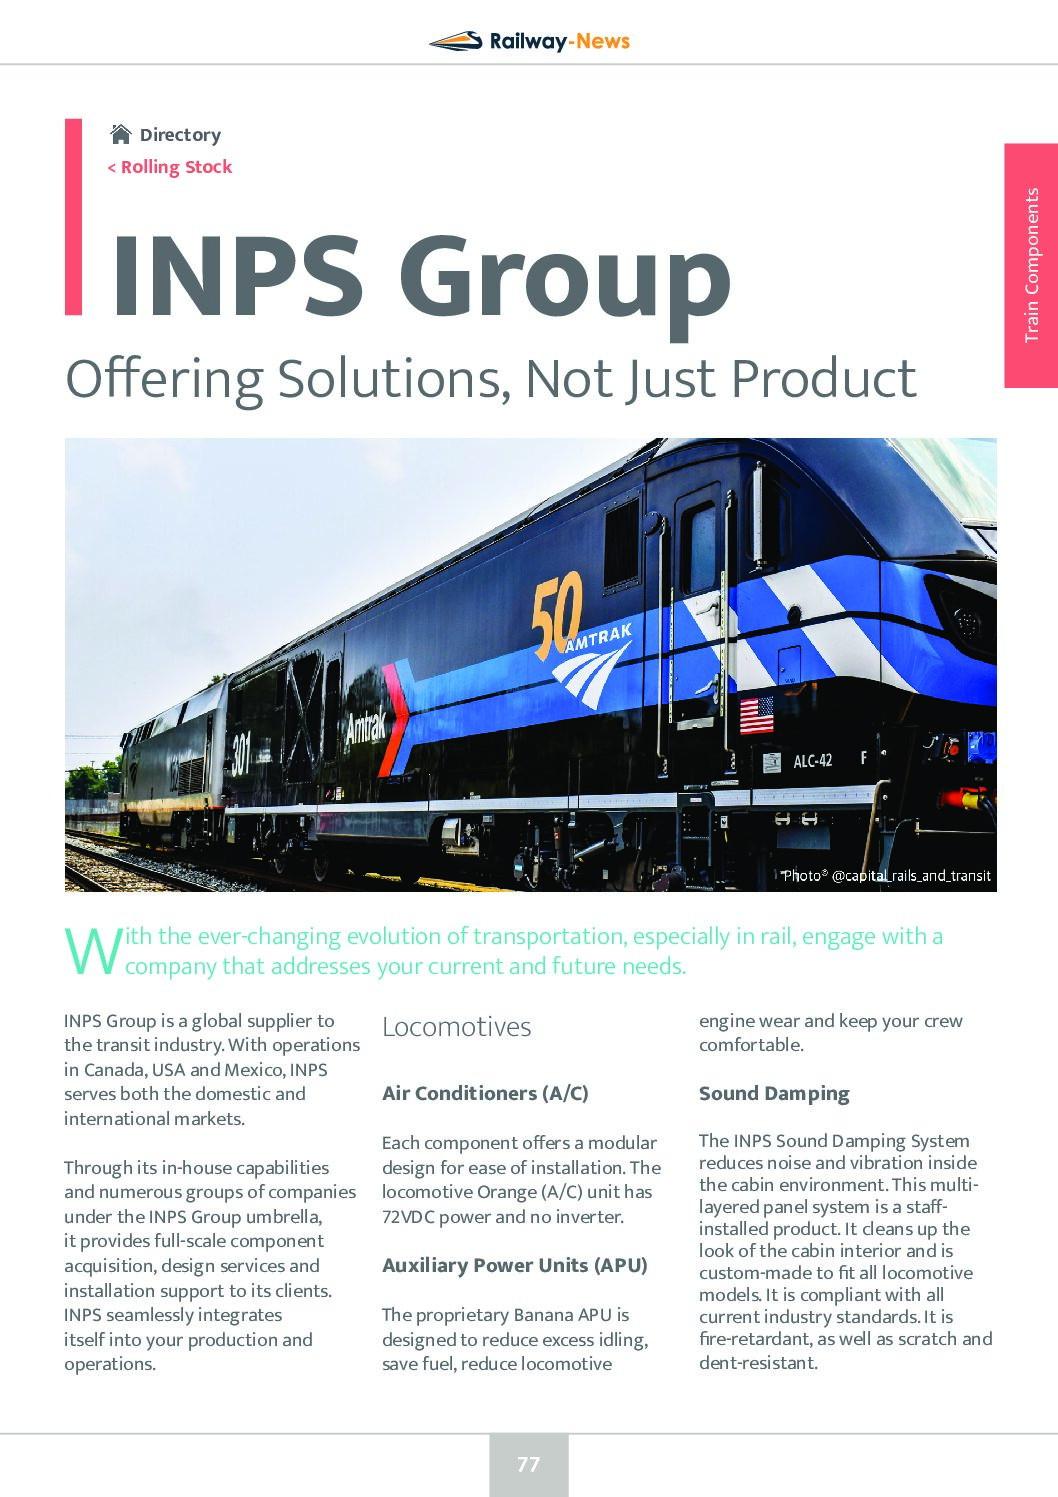 INPS Group: Offering Solutions, Not Just Product